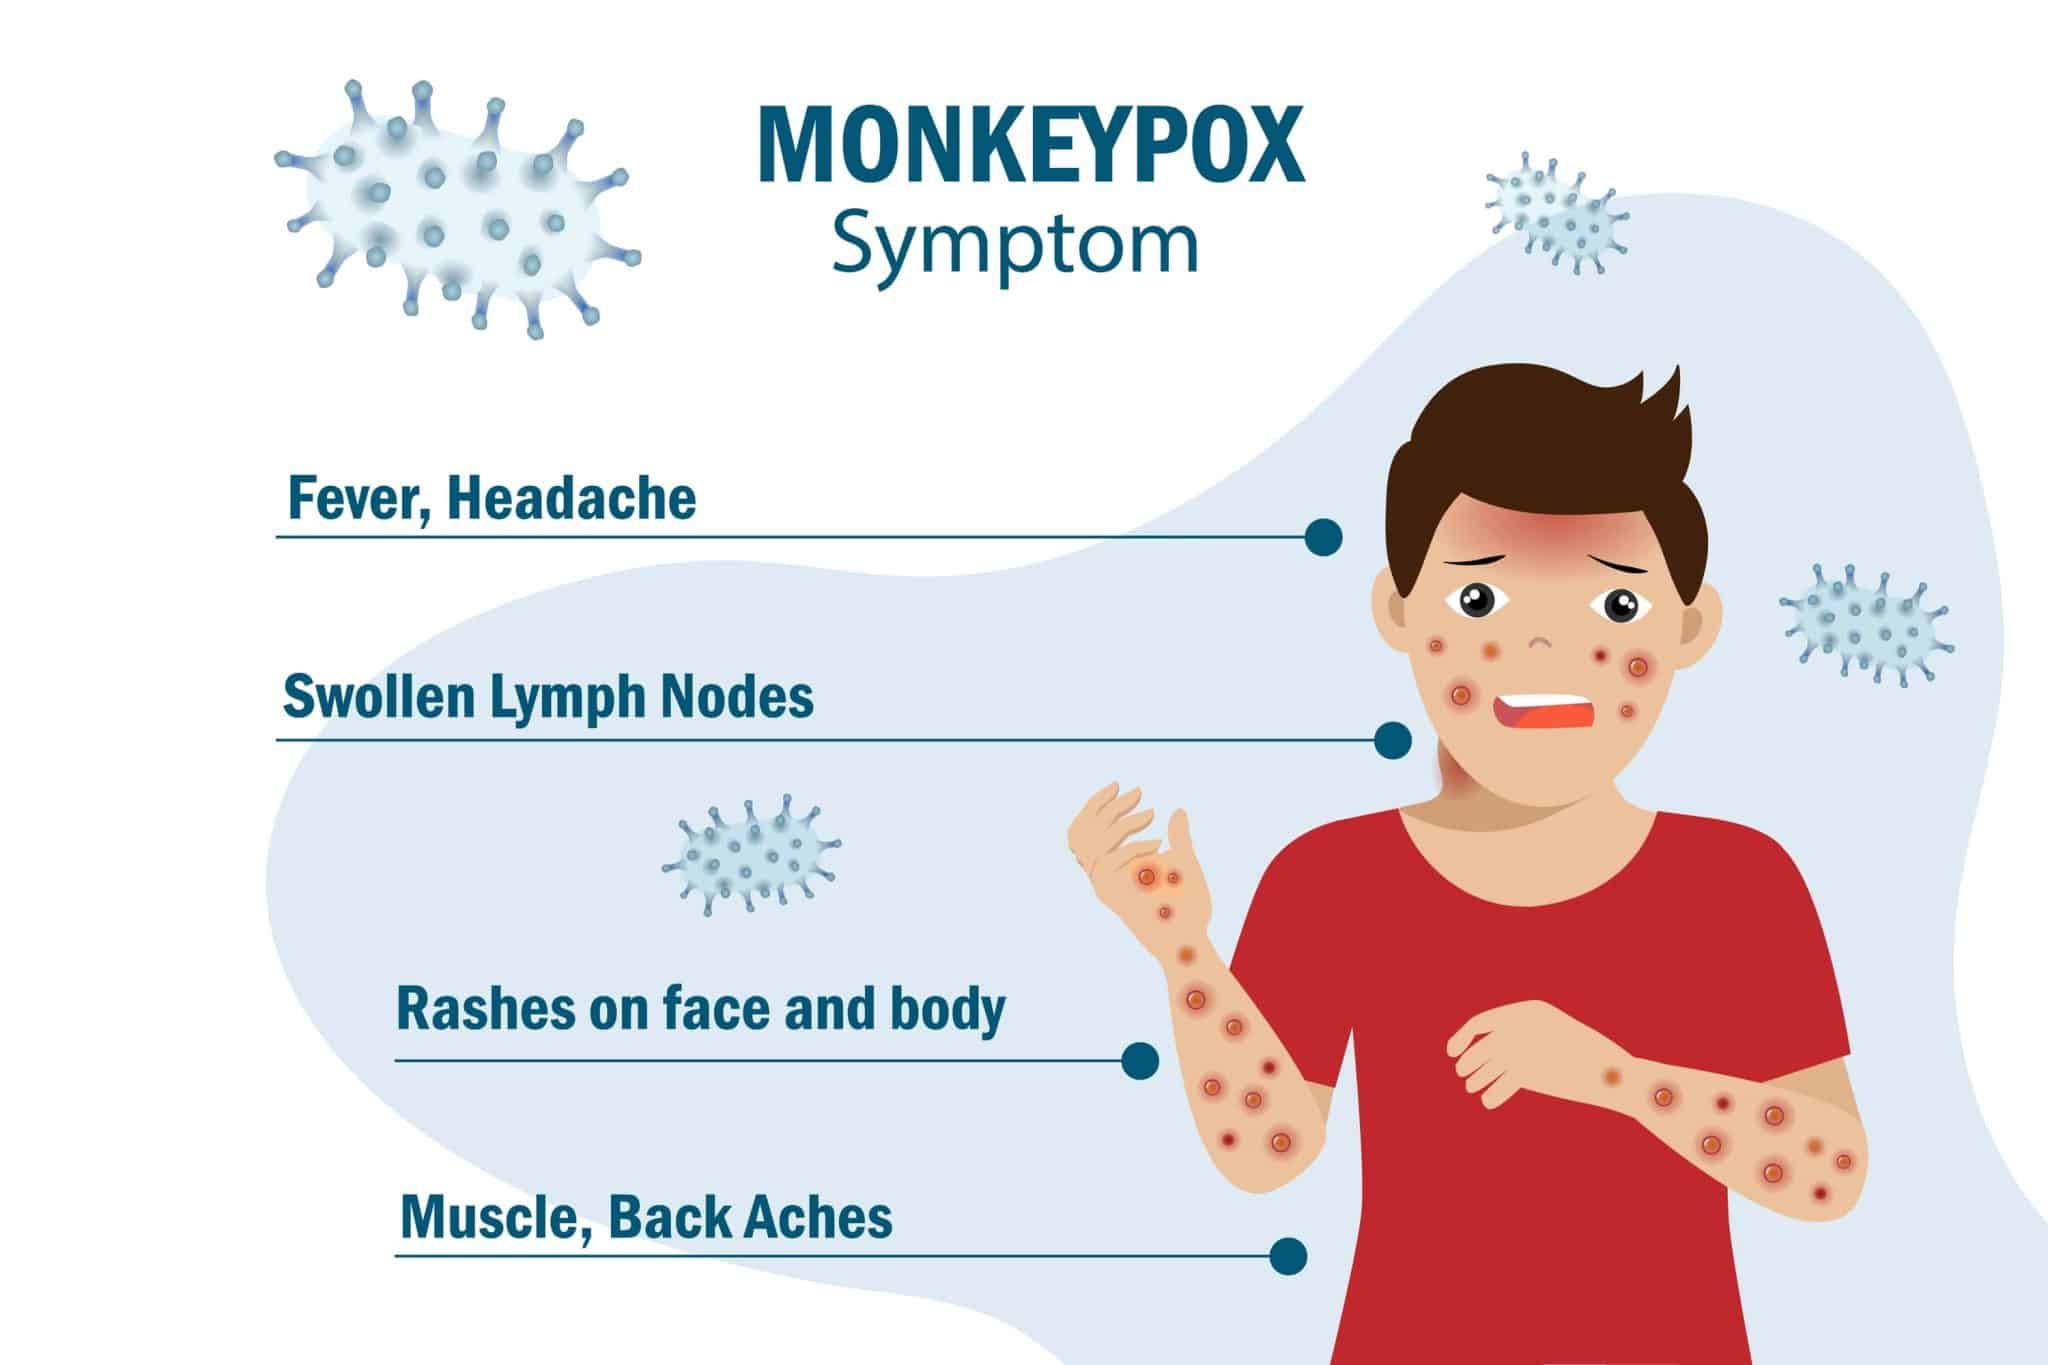 Animated Image shows the symptom from the monkeypox